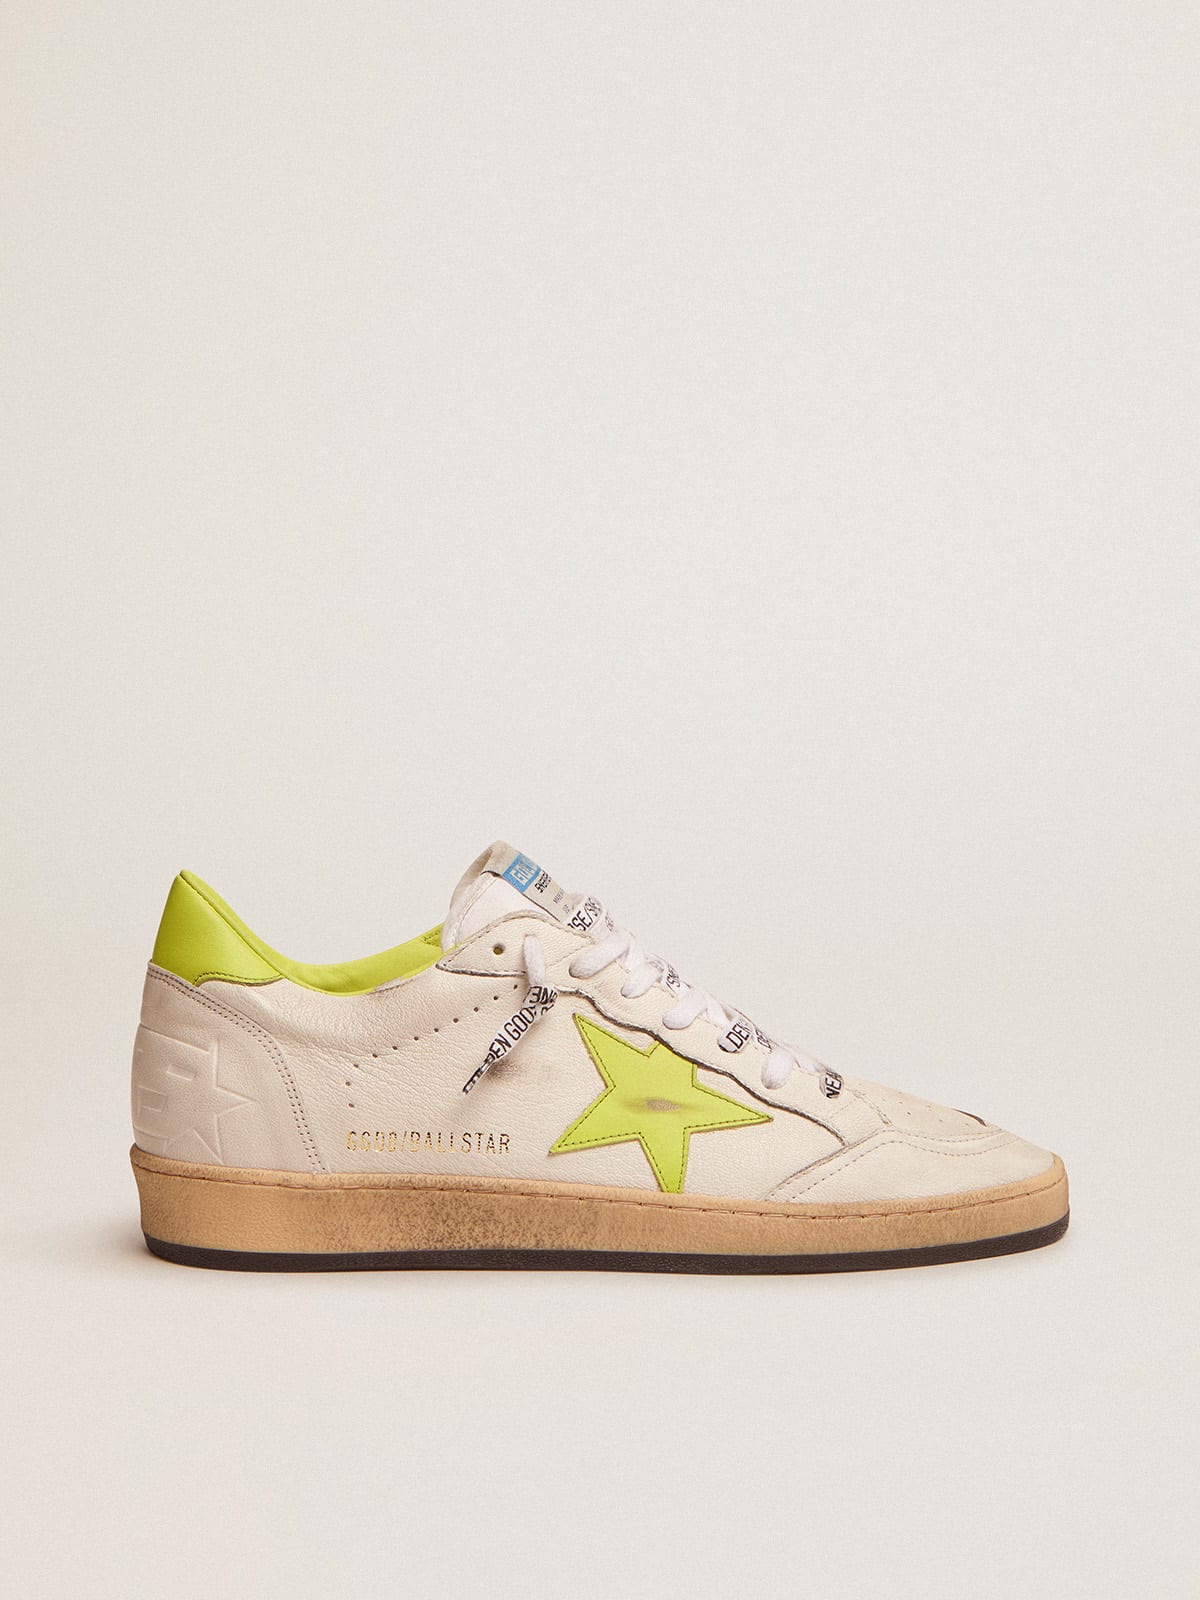 Ball Star LTD sneakers with lime-green leather star and heel tab